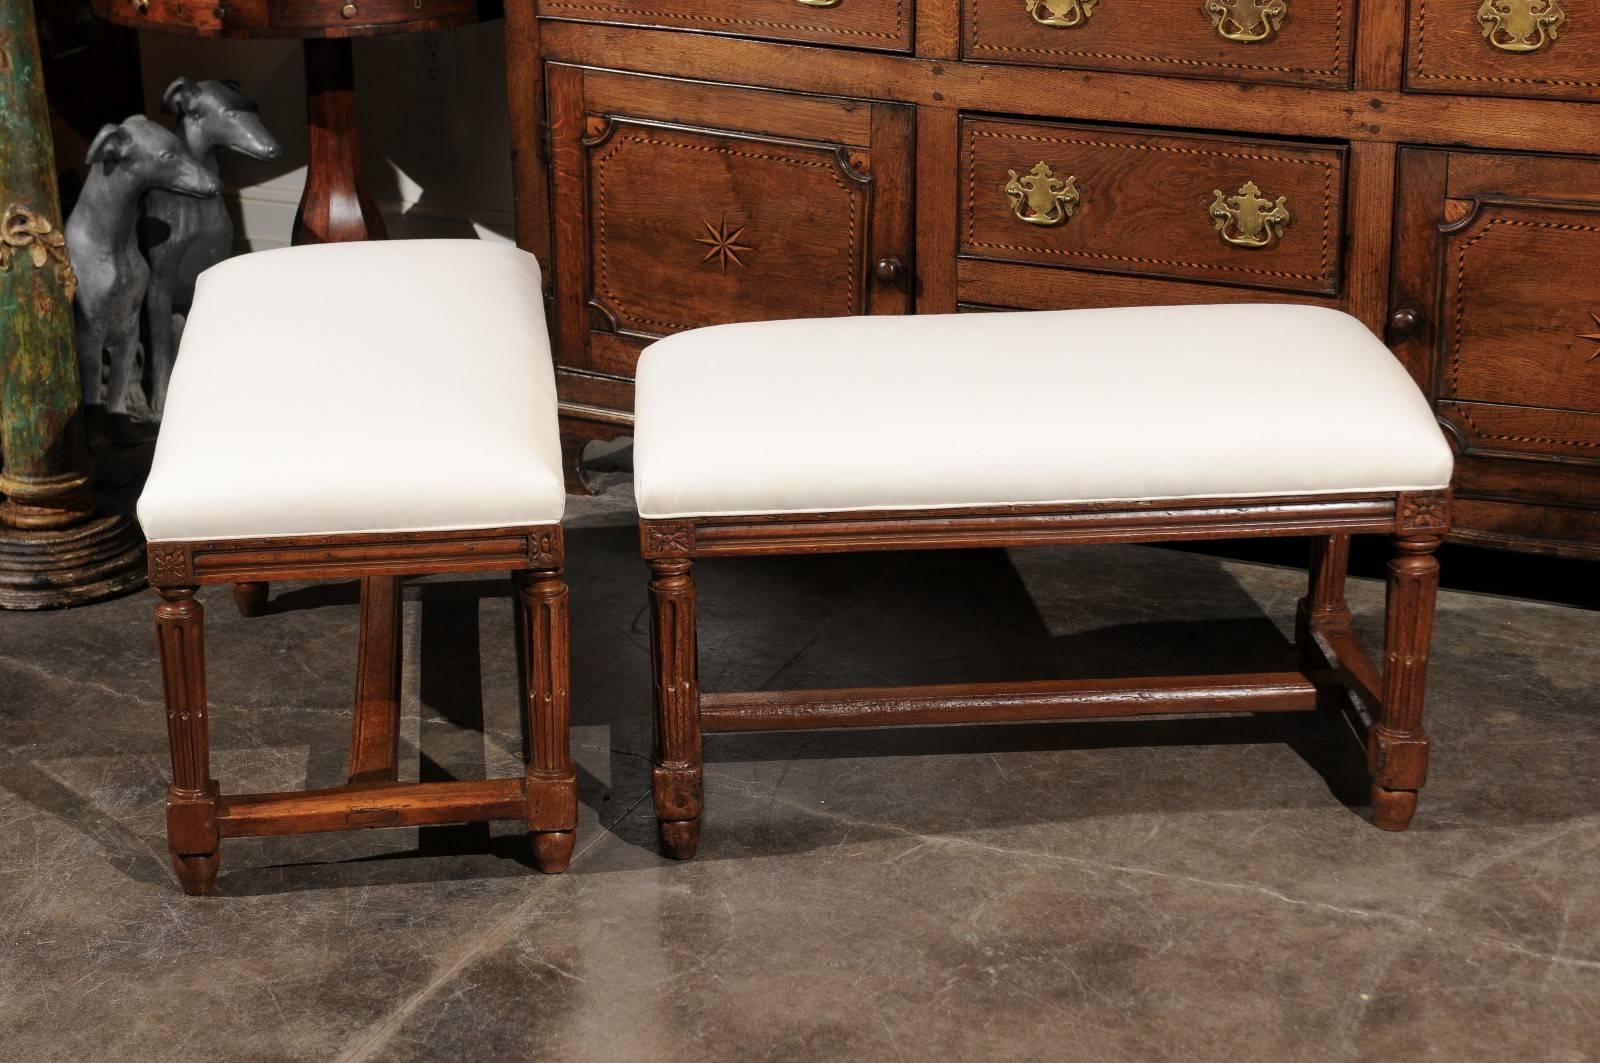 Pair of Italian Walnut Upholstered Wooden Benches from the Early 19th Century 2